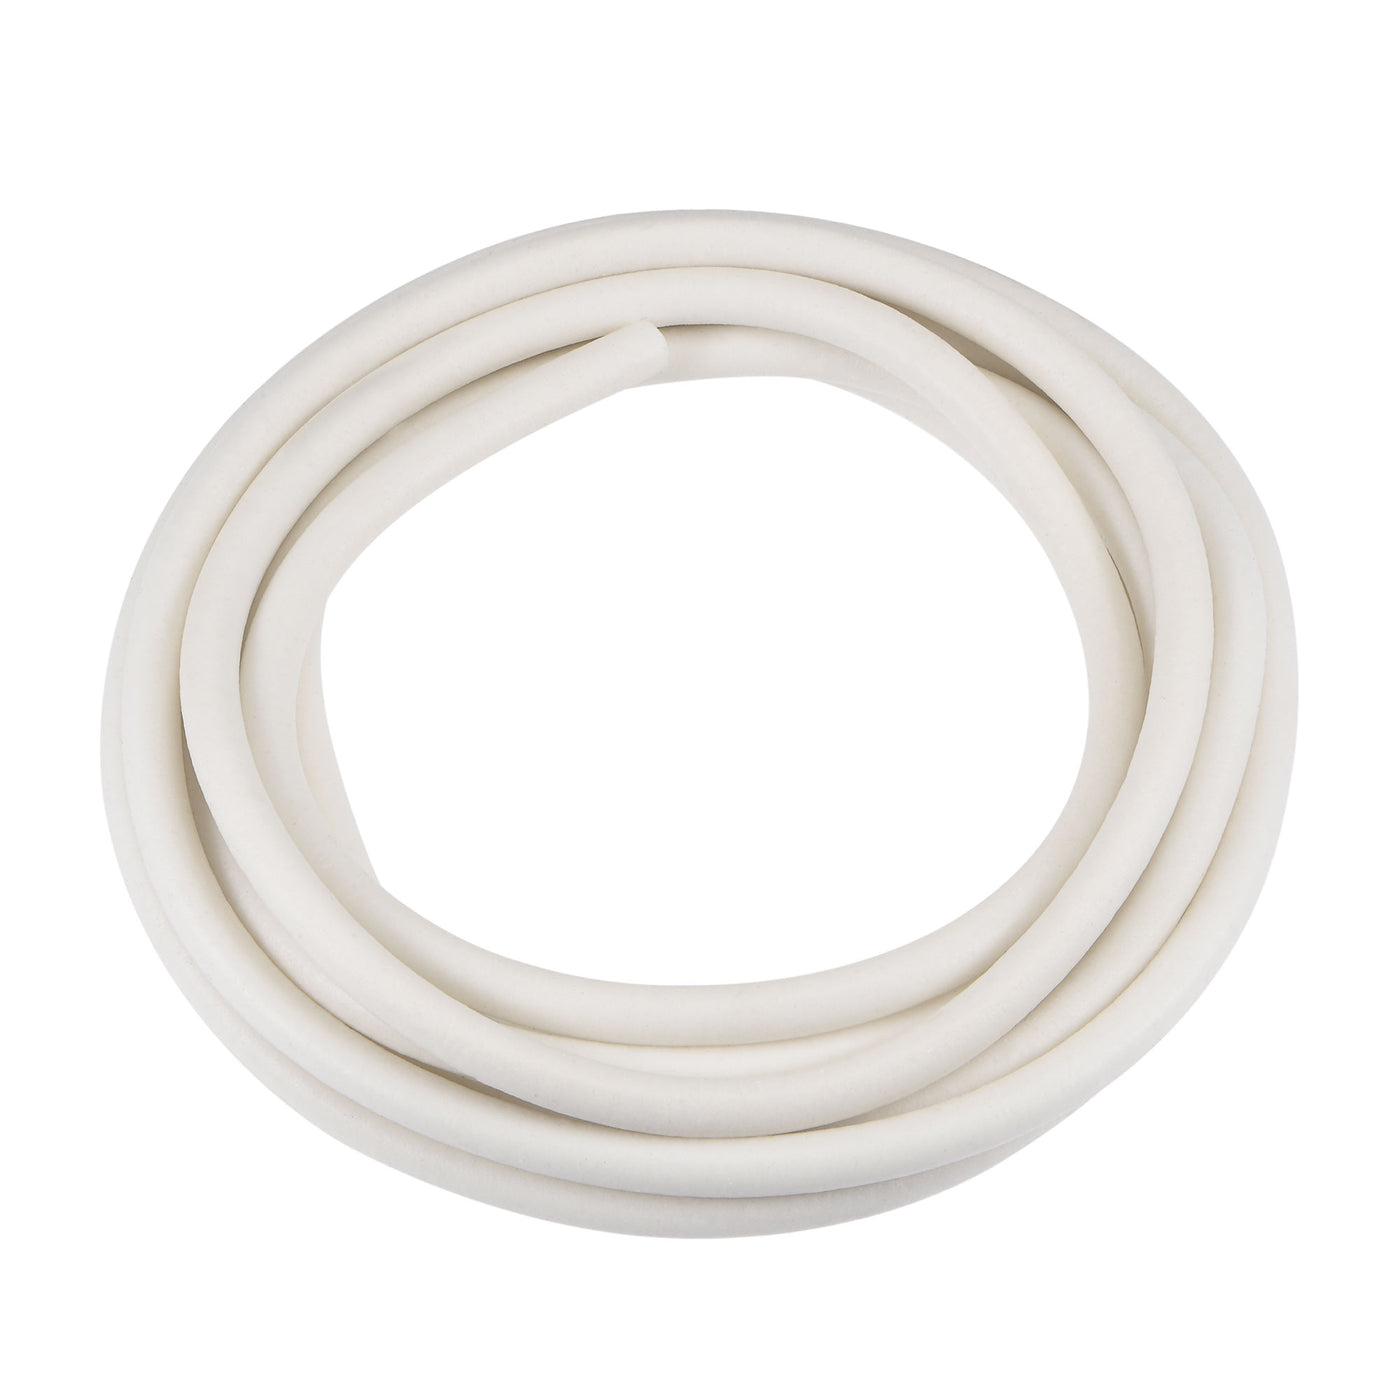 uxcell Uxcell 1/4"(6mm) Soft Silicone Bending Insert Tube for Rigid Tubing 10ft White